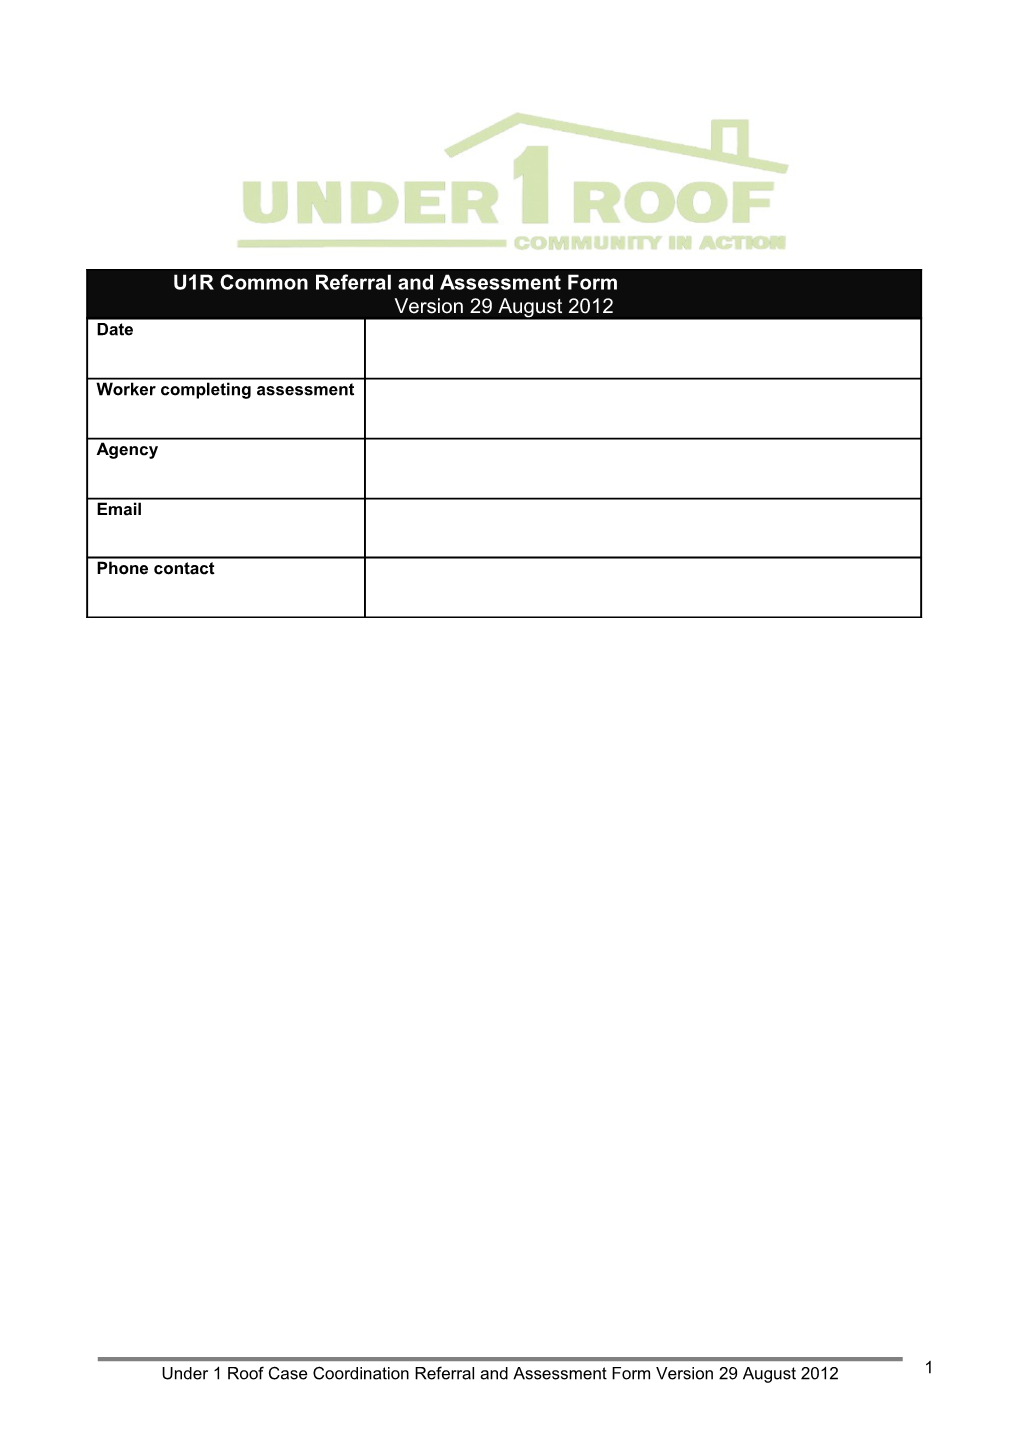 U1R Common Referral and Assessment Form